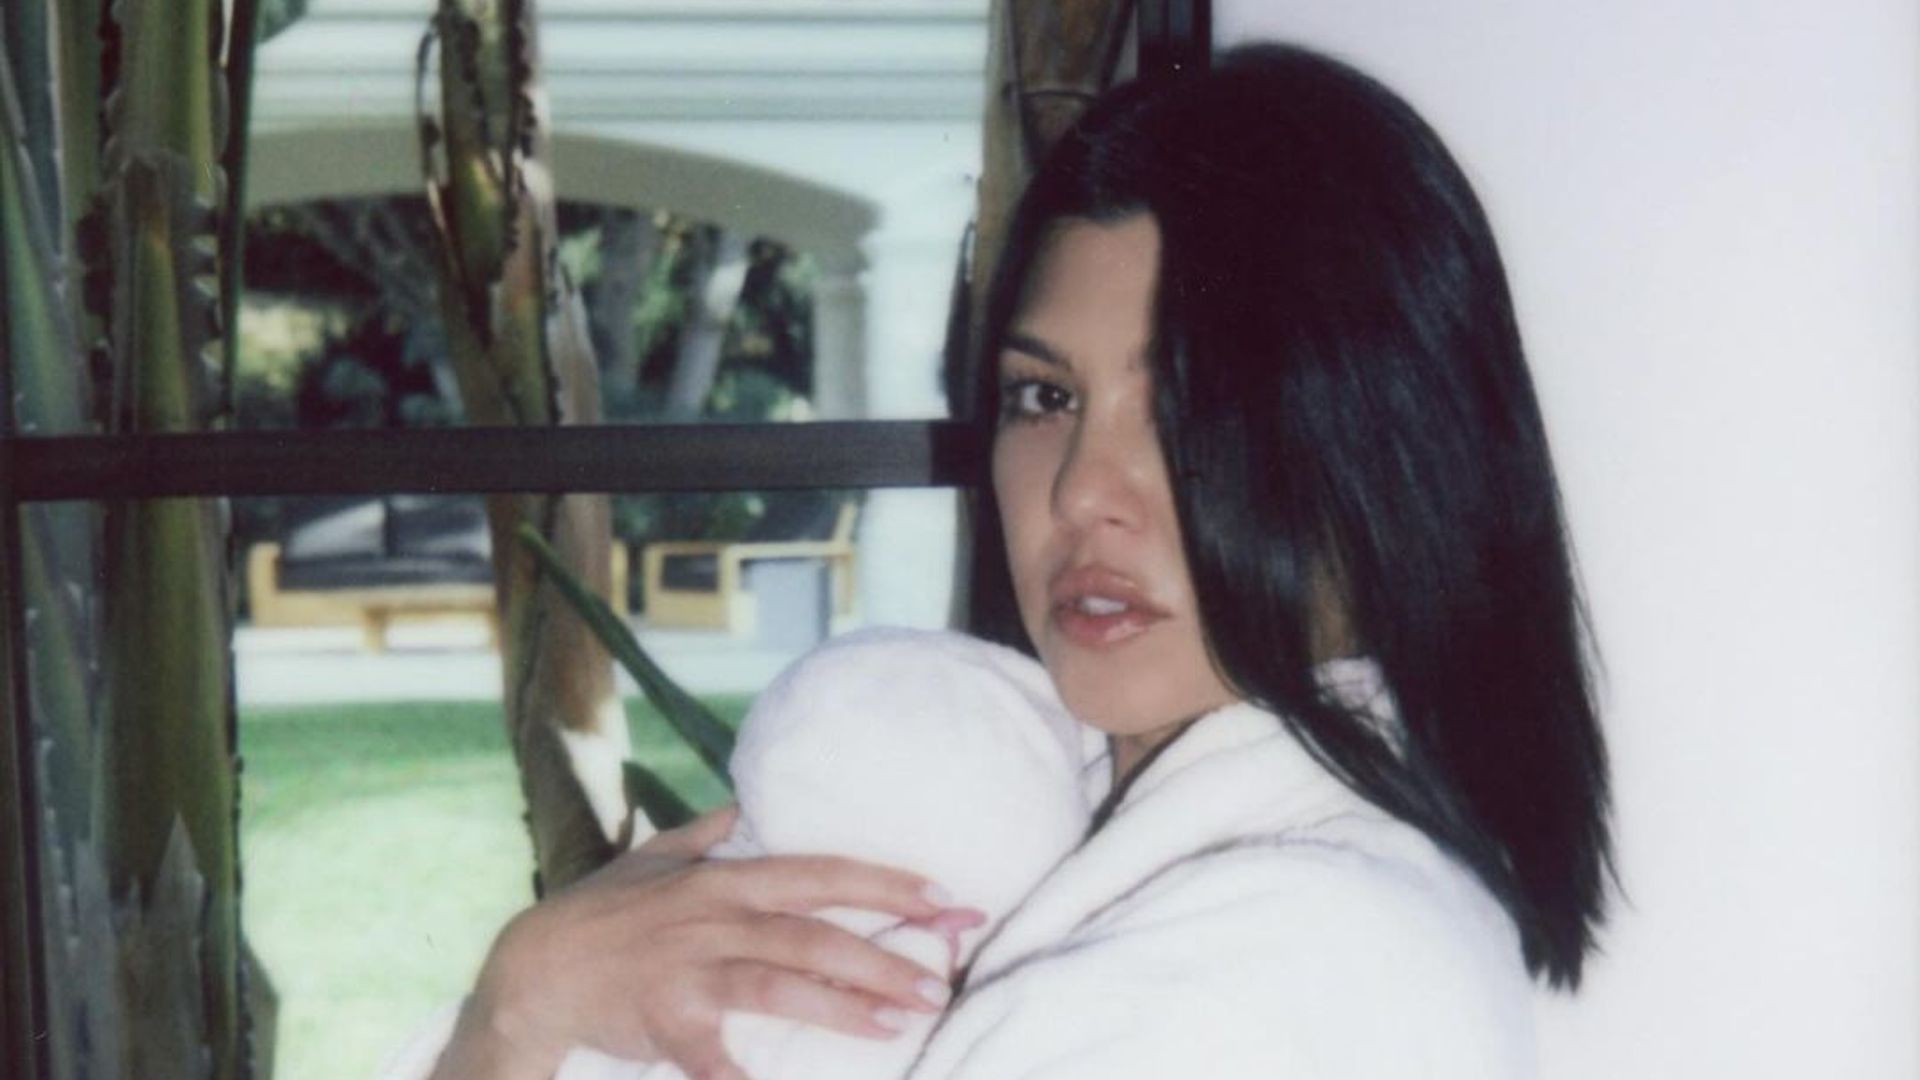 Kourtney Kardashian details deeply personal journey she underwent before getting pregnant with Rocky